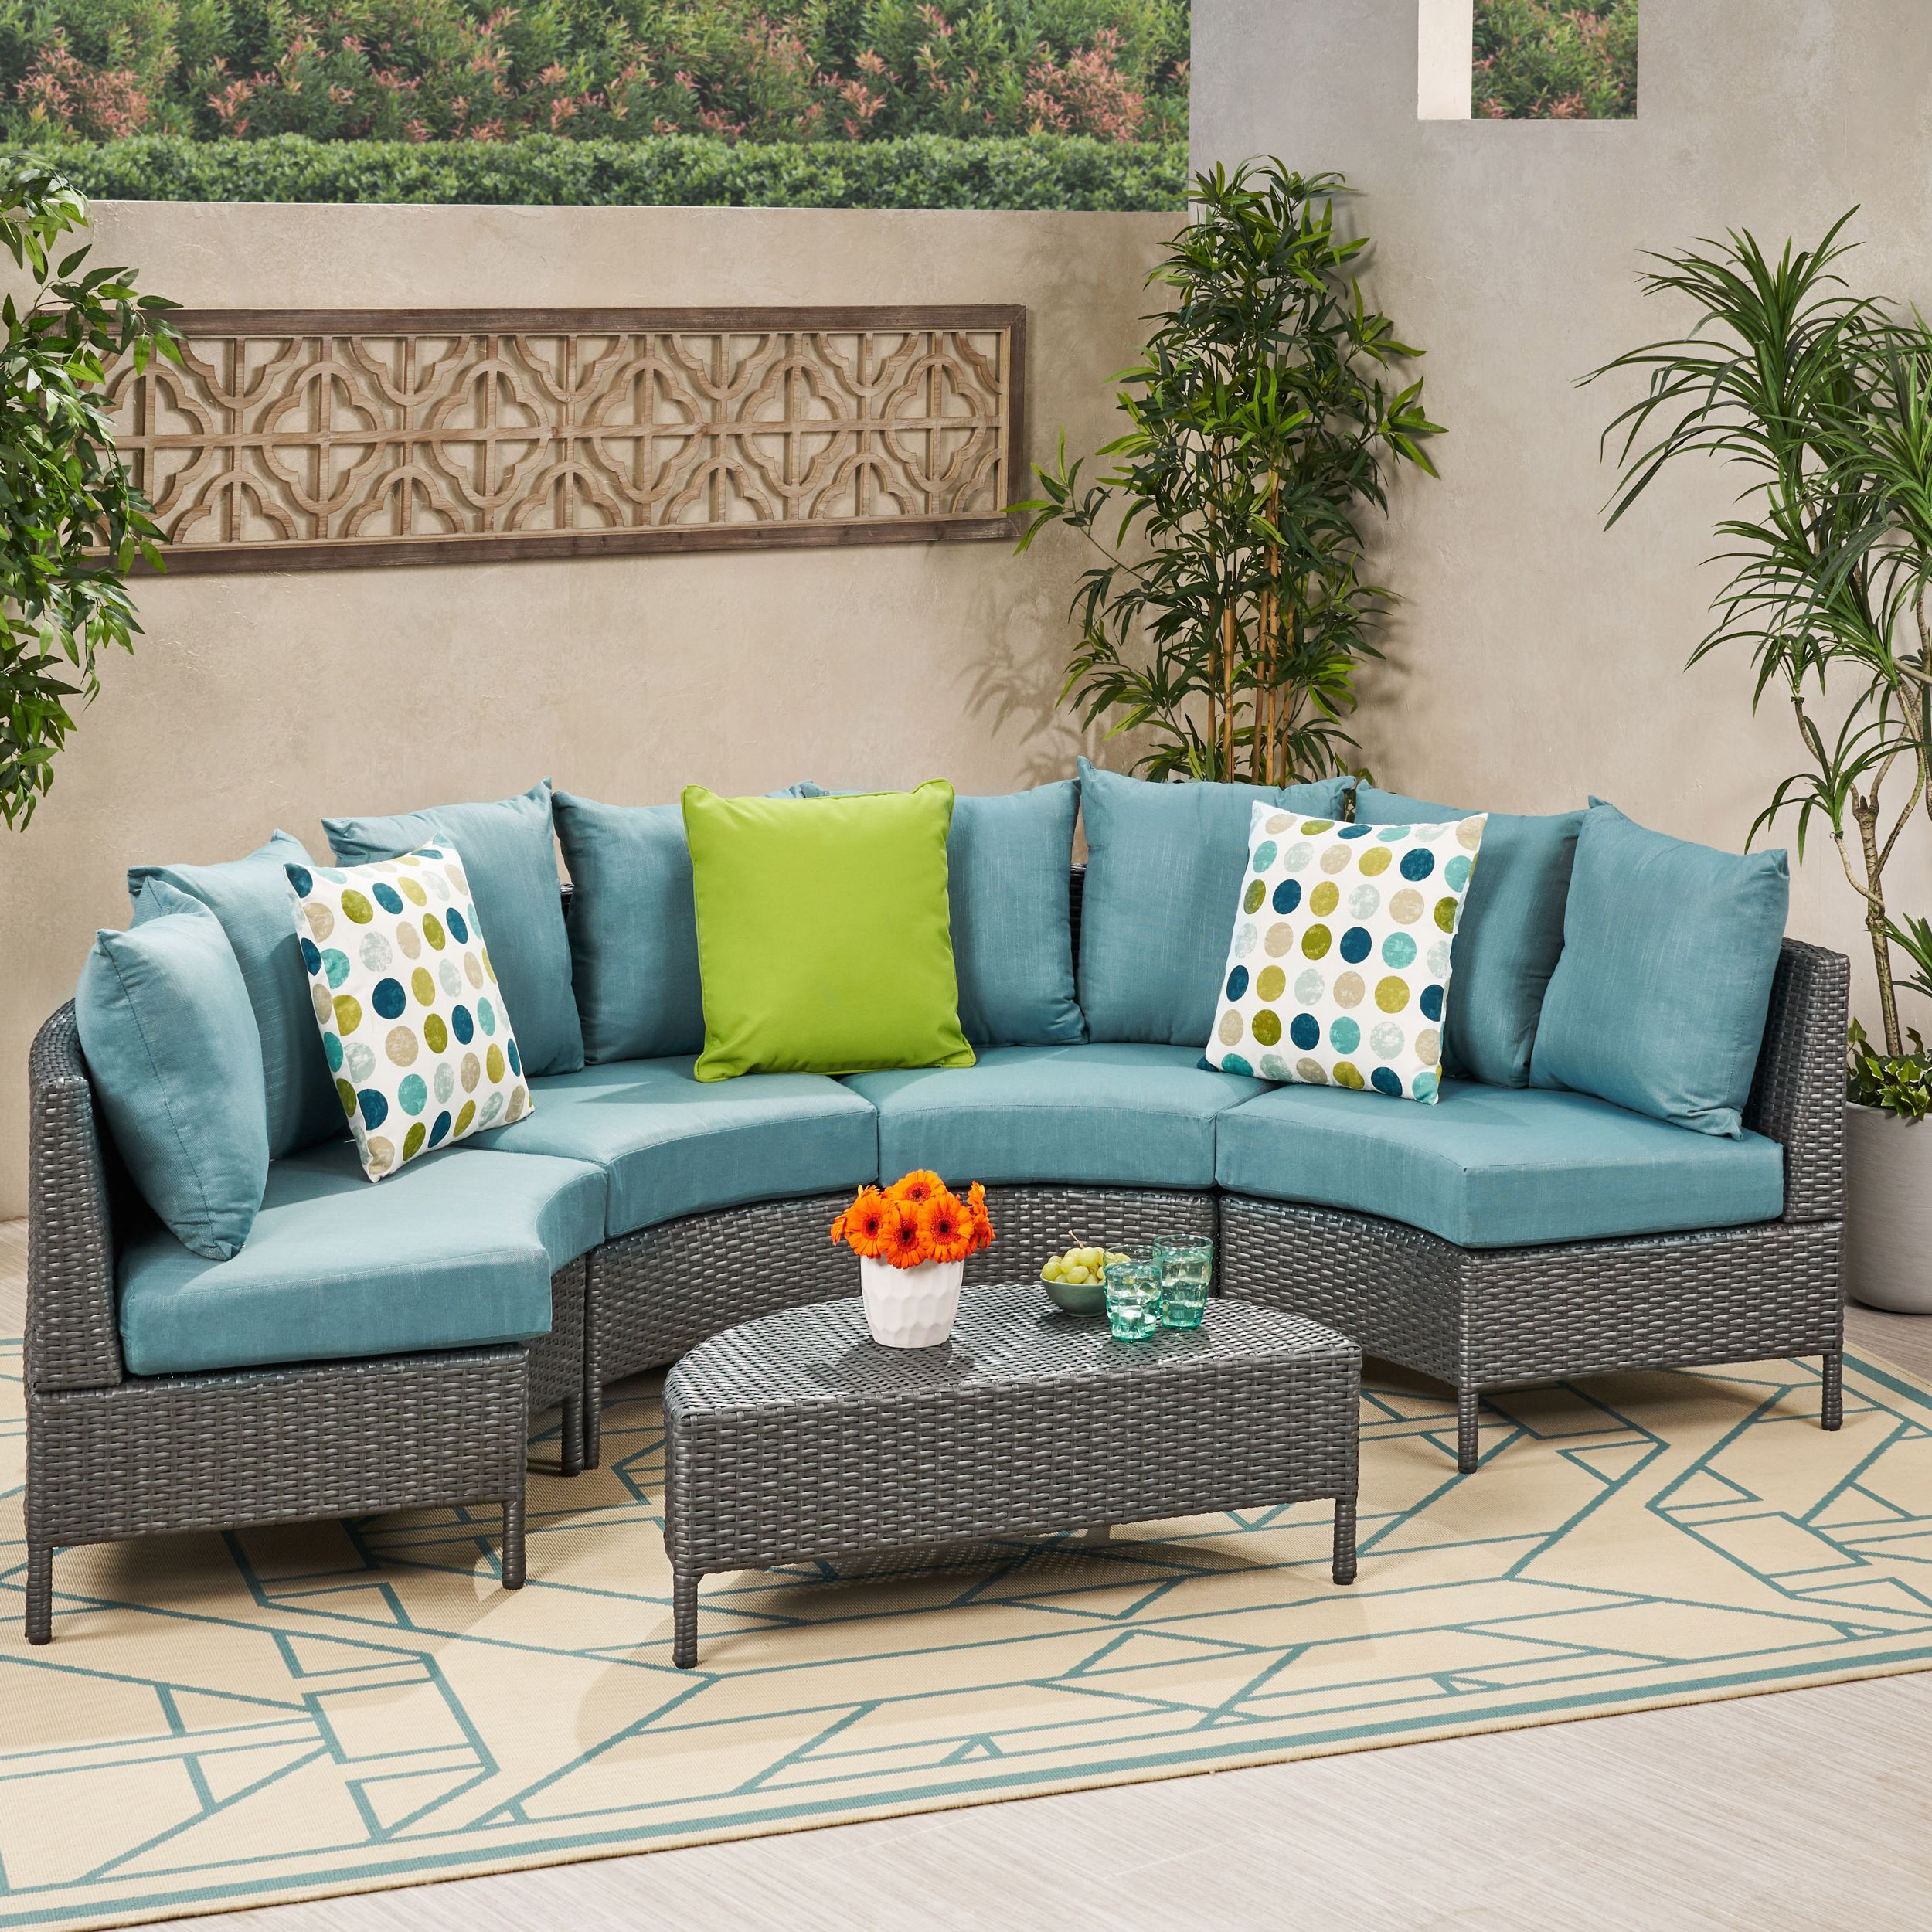 Outdoor Seating Sectional Patio Sets For Recent Hampton Outdoor 8 Seater Wicker Sectional Sofa Set With Cushions, Grey (View 2 of 15)